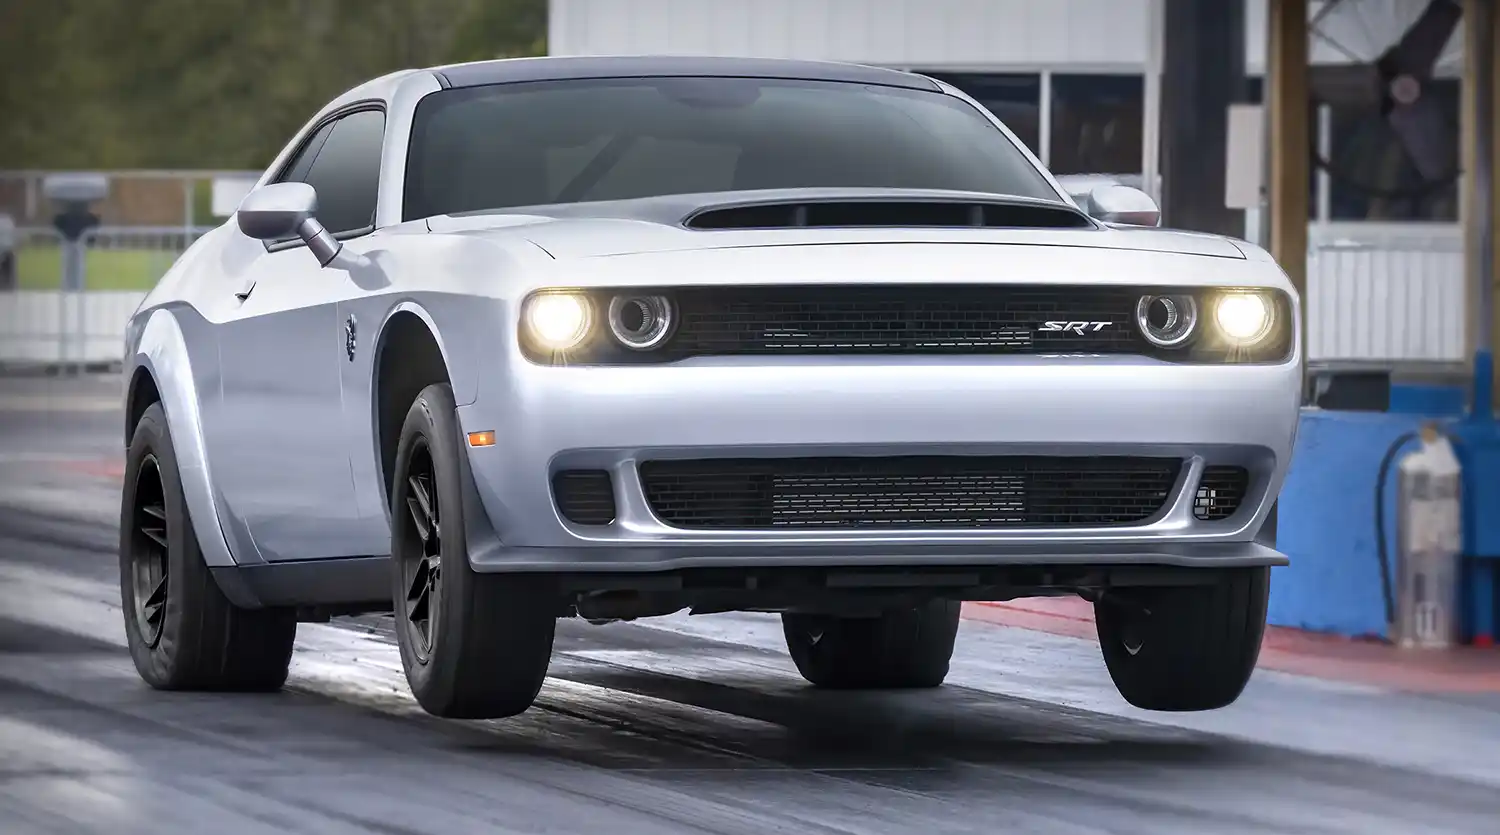 Dodge Direct Connection, Jay Leno's Garage Launch Premium Car Care Products